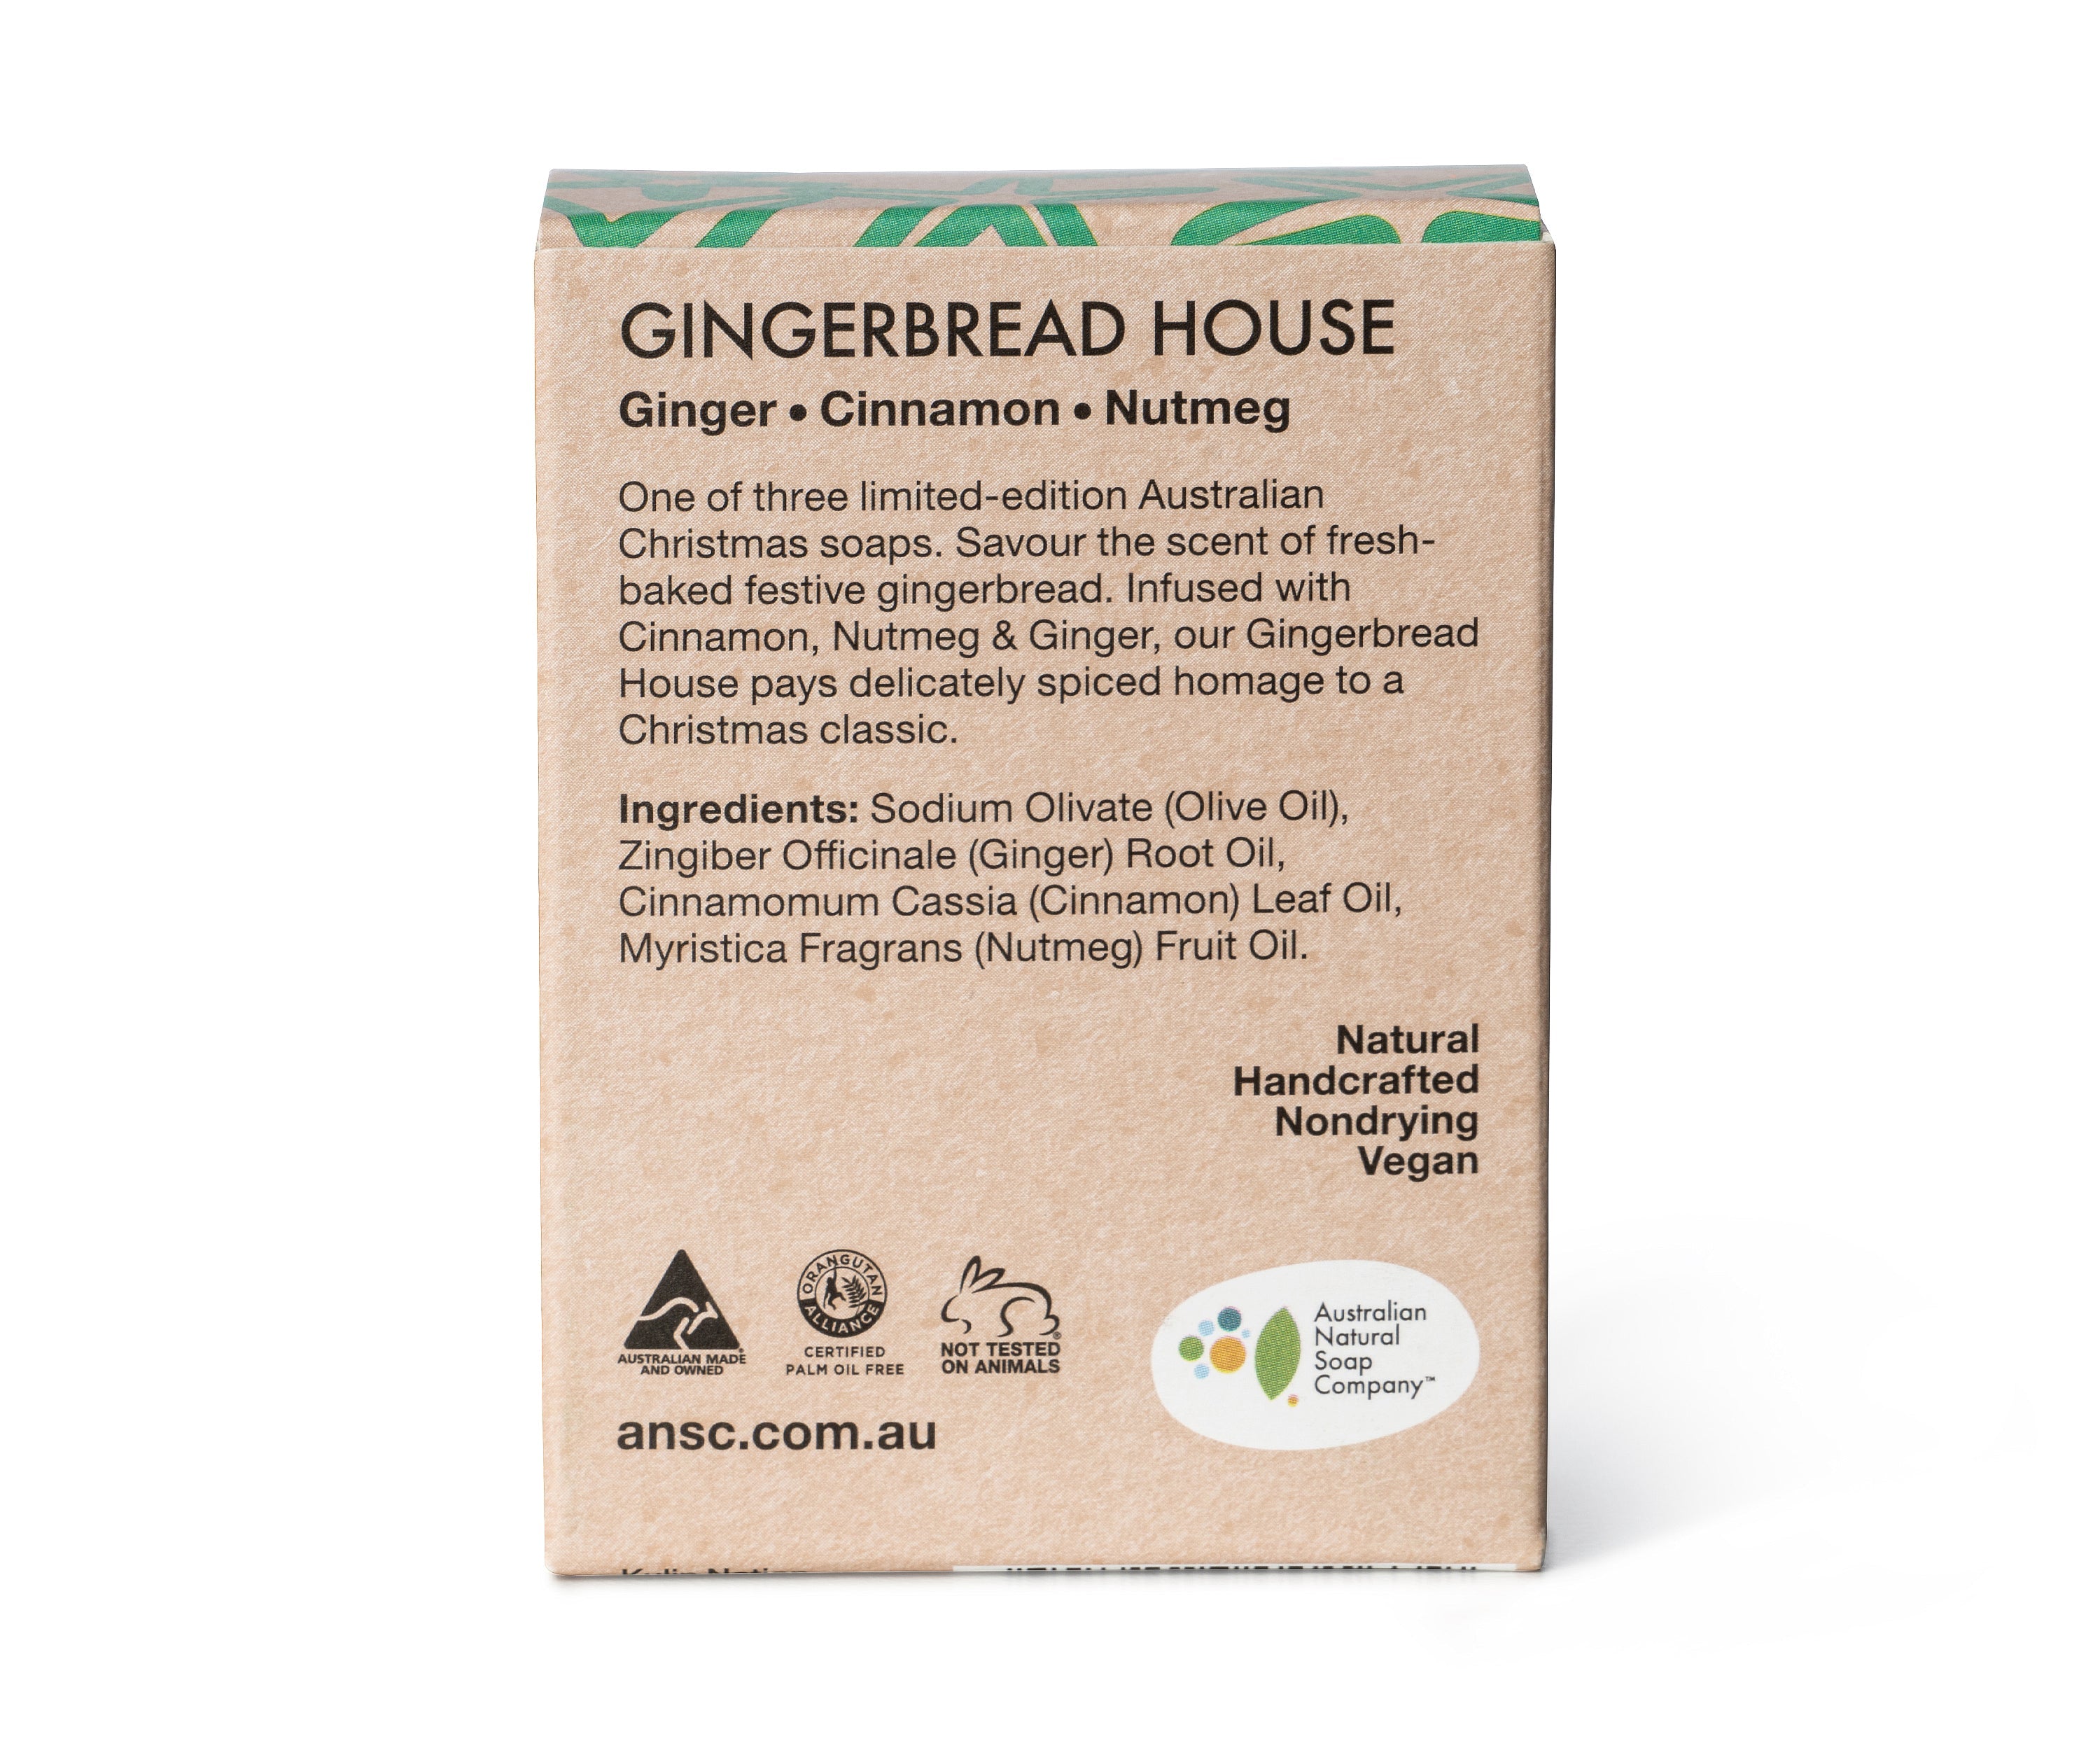 The Australian Natural Co Hand & Body - Christmas Edition Gingerbread House 100g